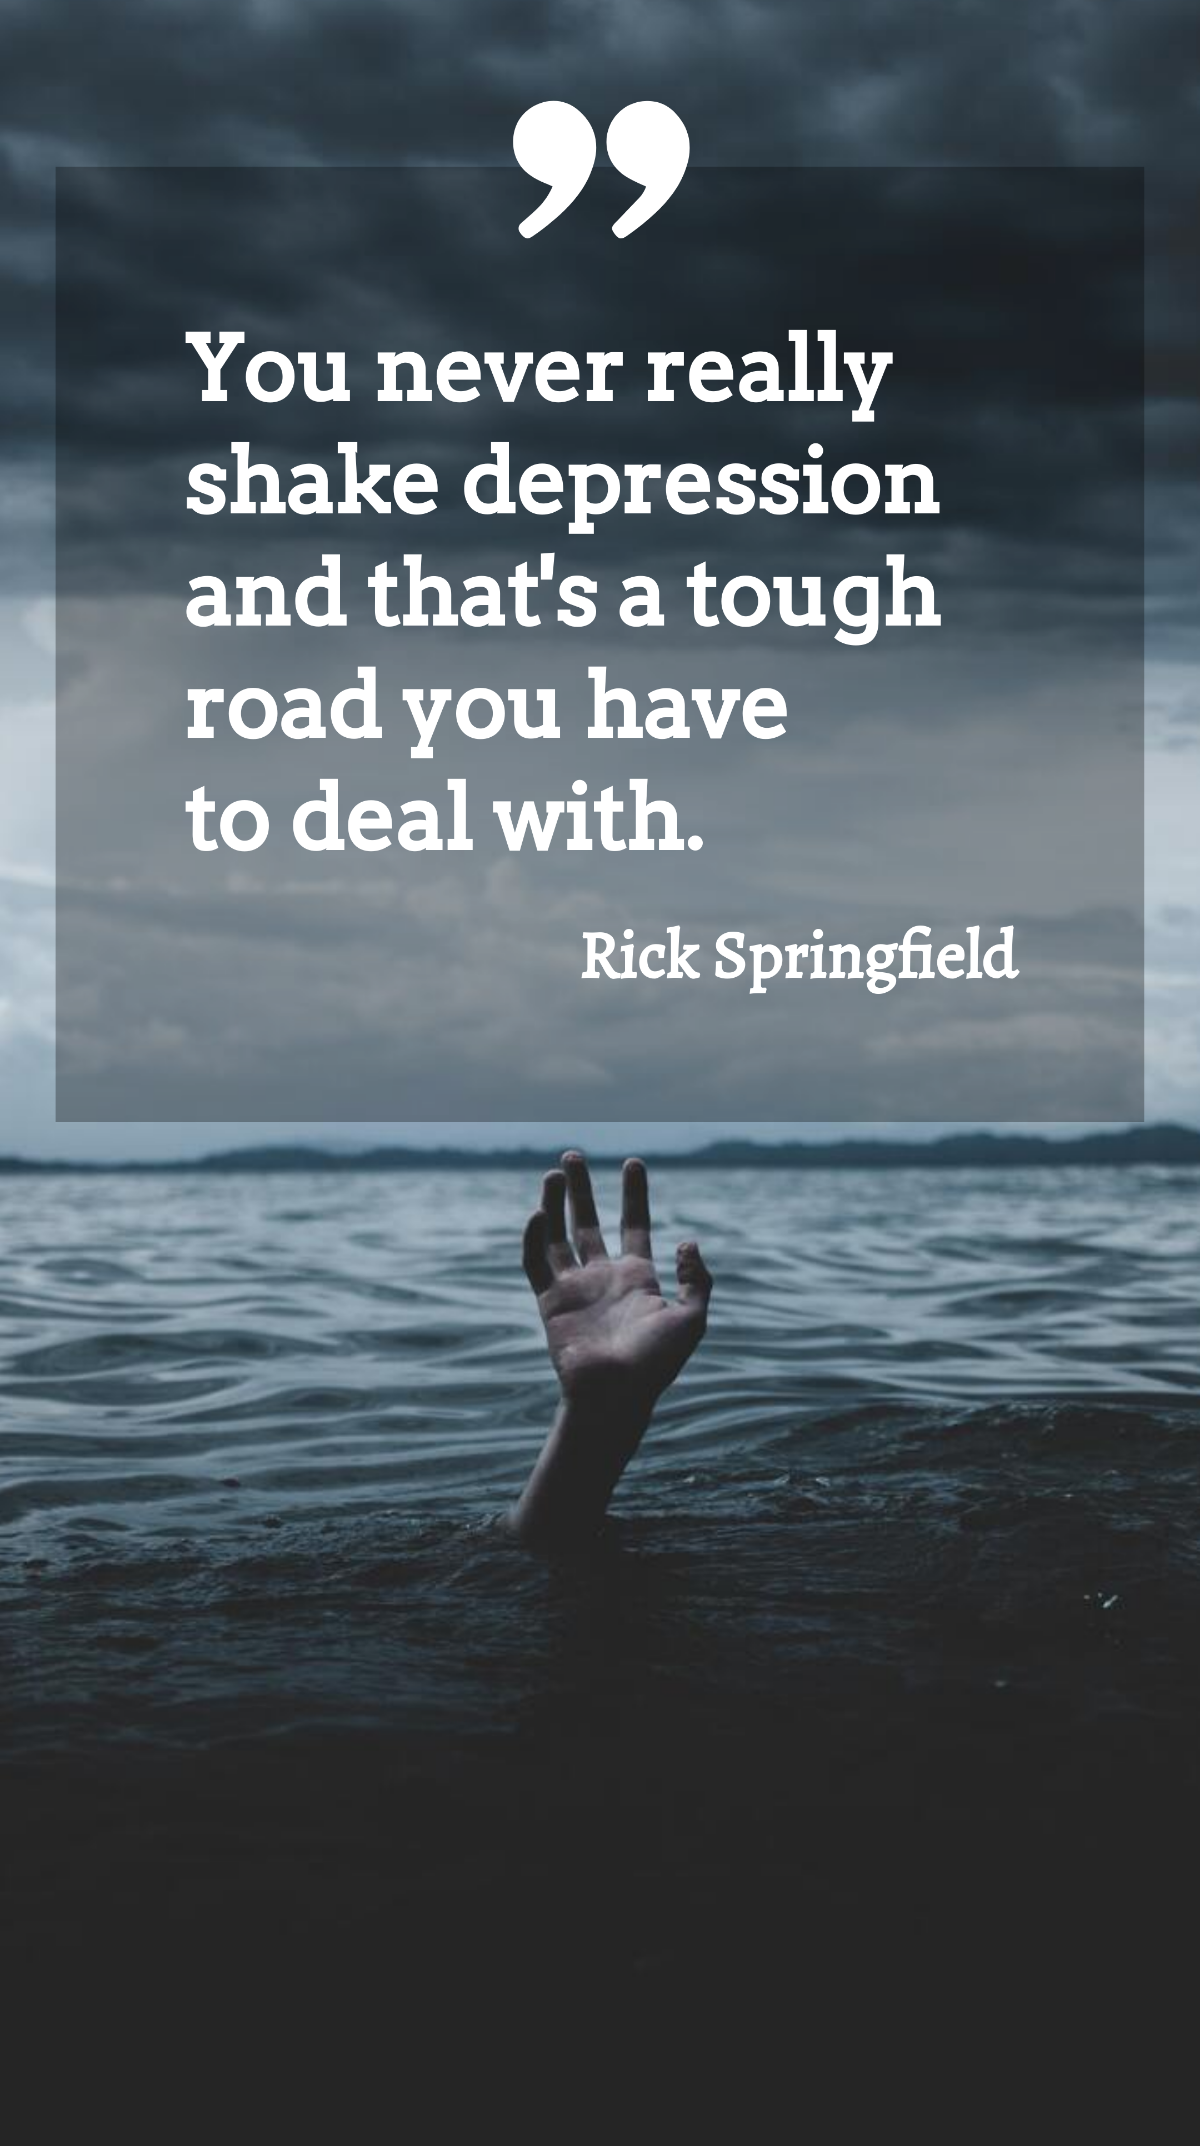 Rick Springfield - You never really shake depression and that's a tough road you have to deal with. Template